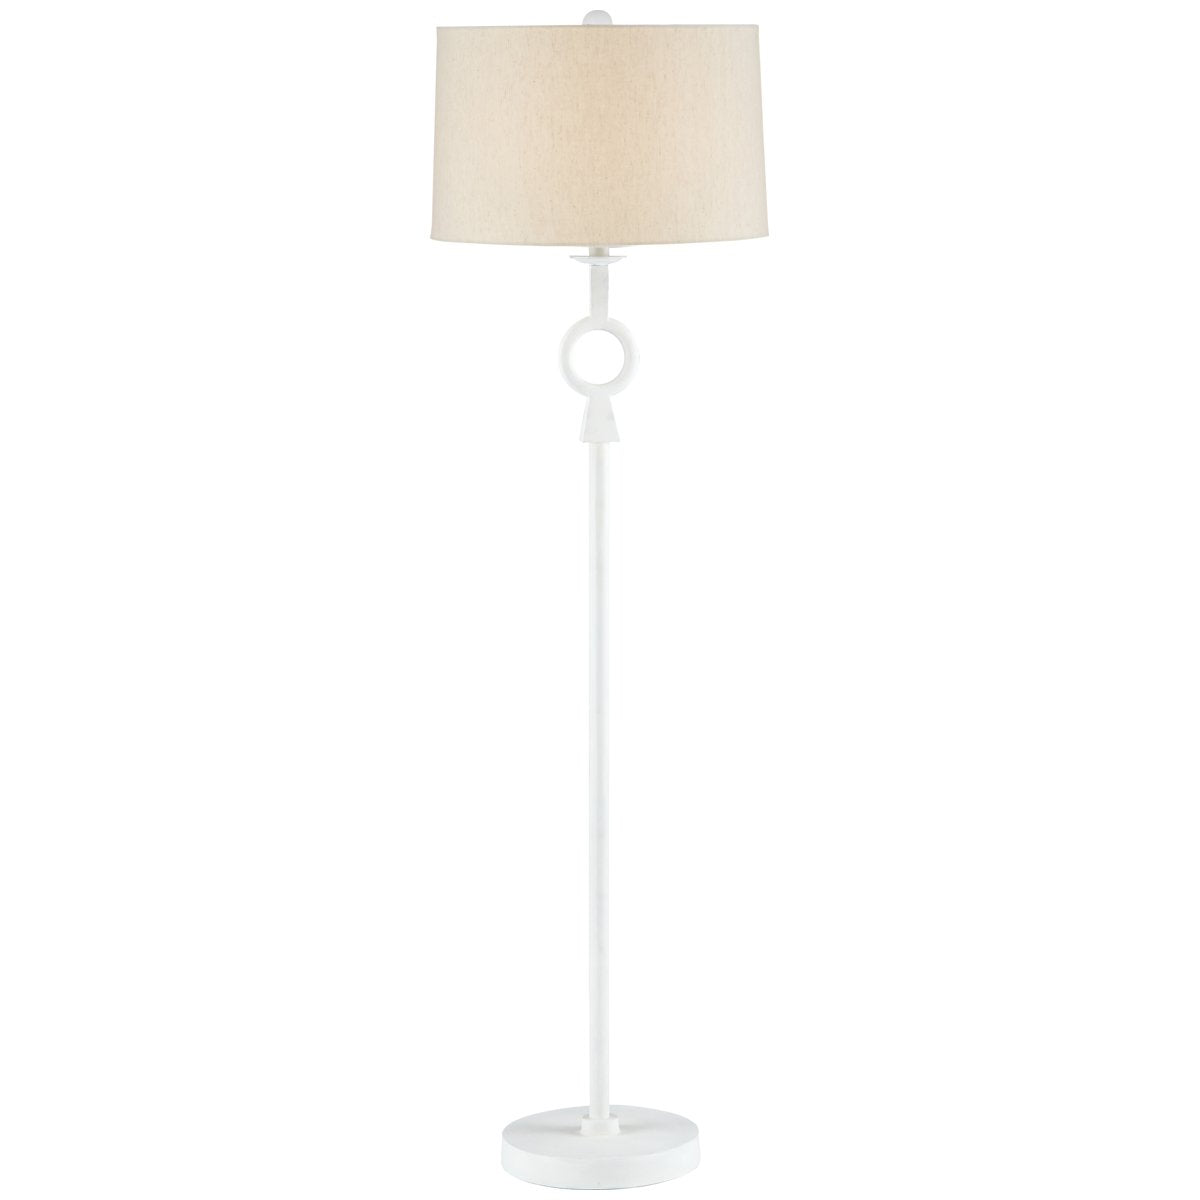 Currey and Company Germaine Floor Lamp